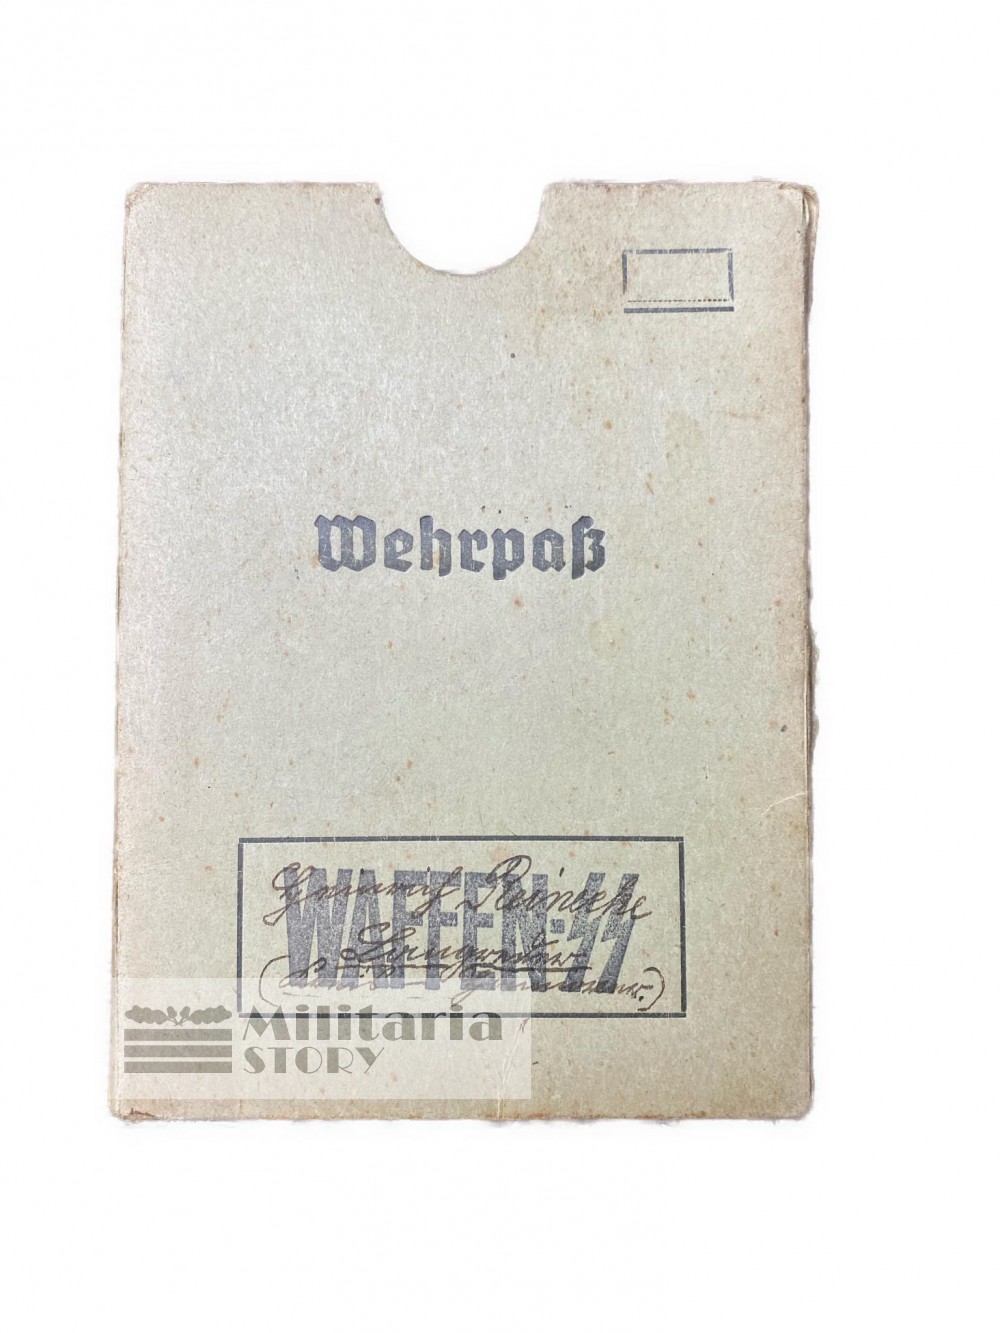 Waffen SS Wehrpass cover - Waffen SS Wehrpass cover: Vintage German Other